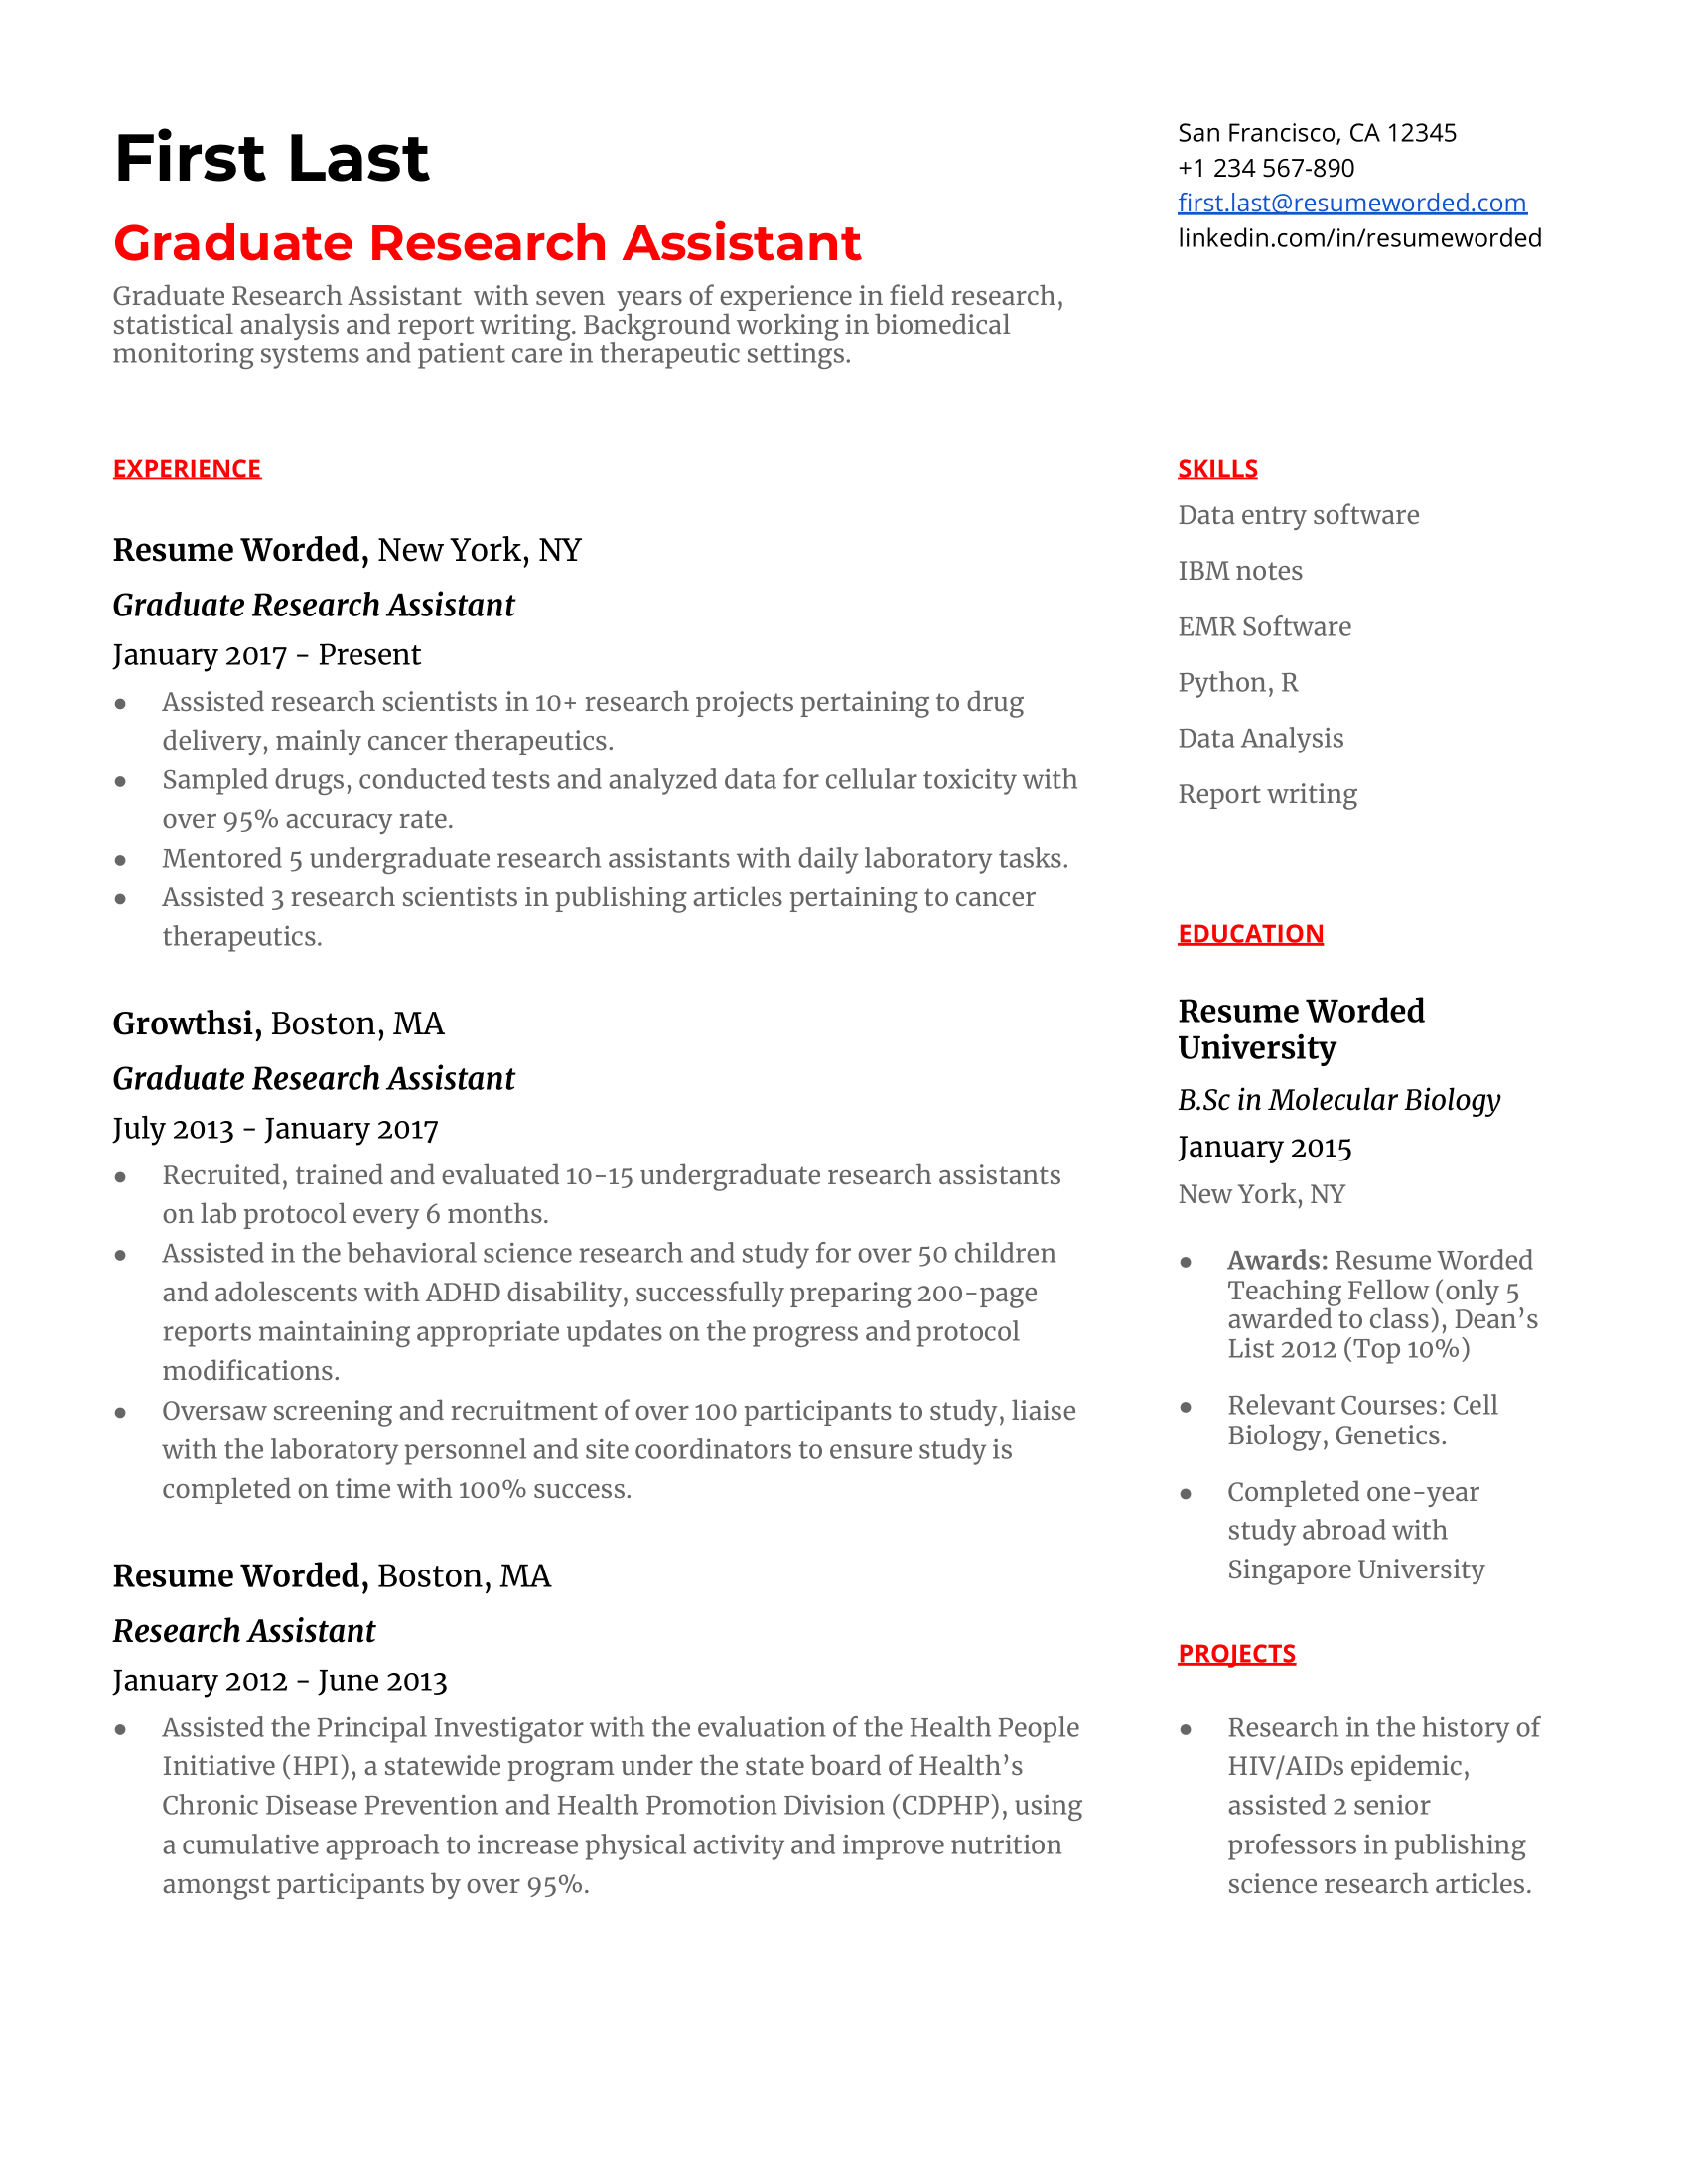 Graduate Research Assistant Resume Template + Example